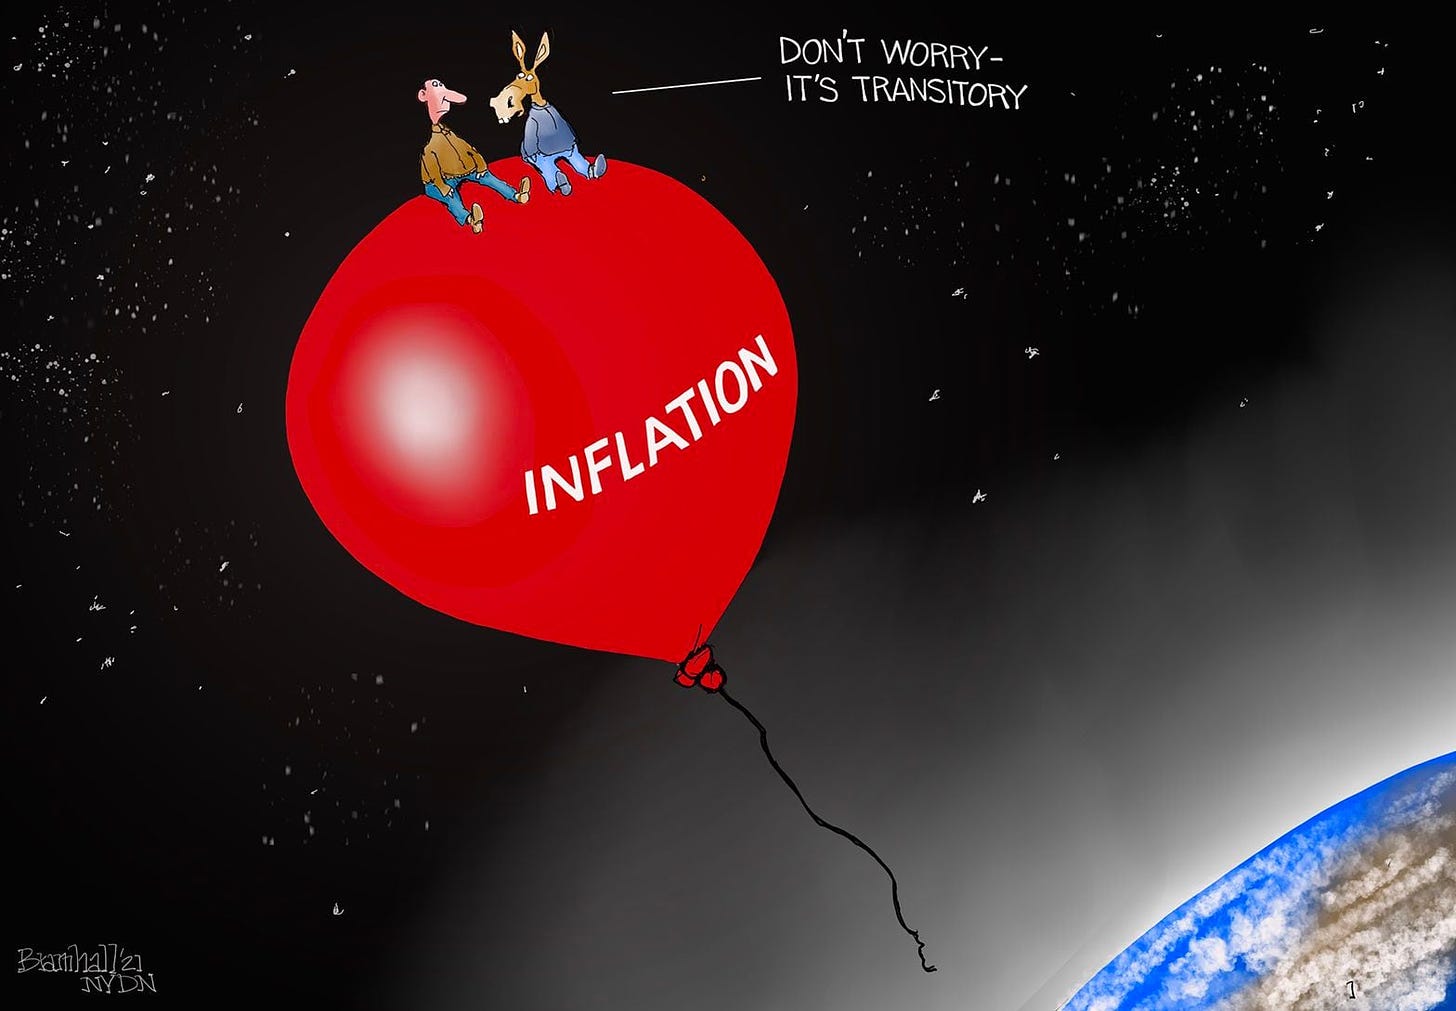 Editorial cartoons for Nov. 14, 2021: Inflation, infrastructure ...